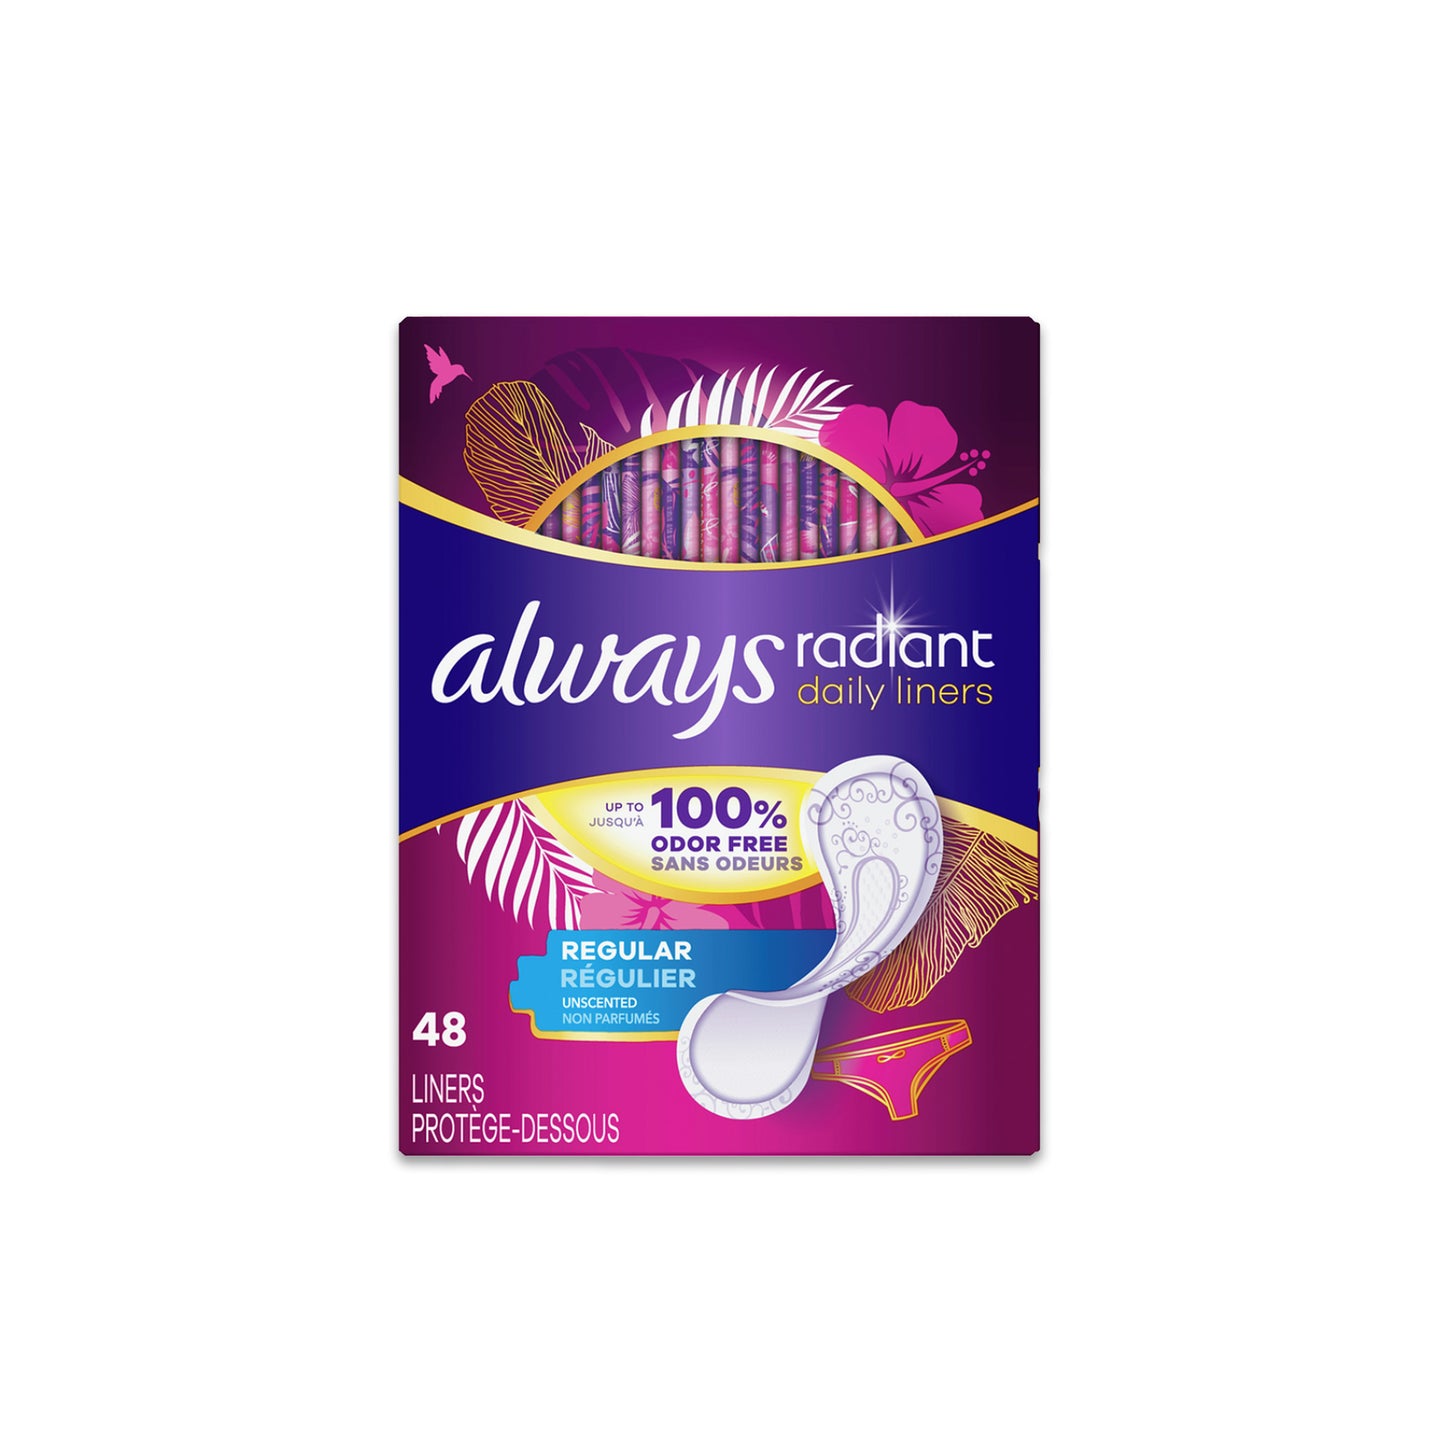 ALWAYS - Radiant Daily Panty Liners (48 Count)